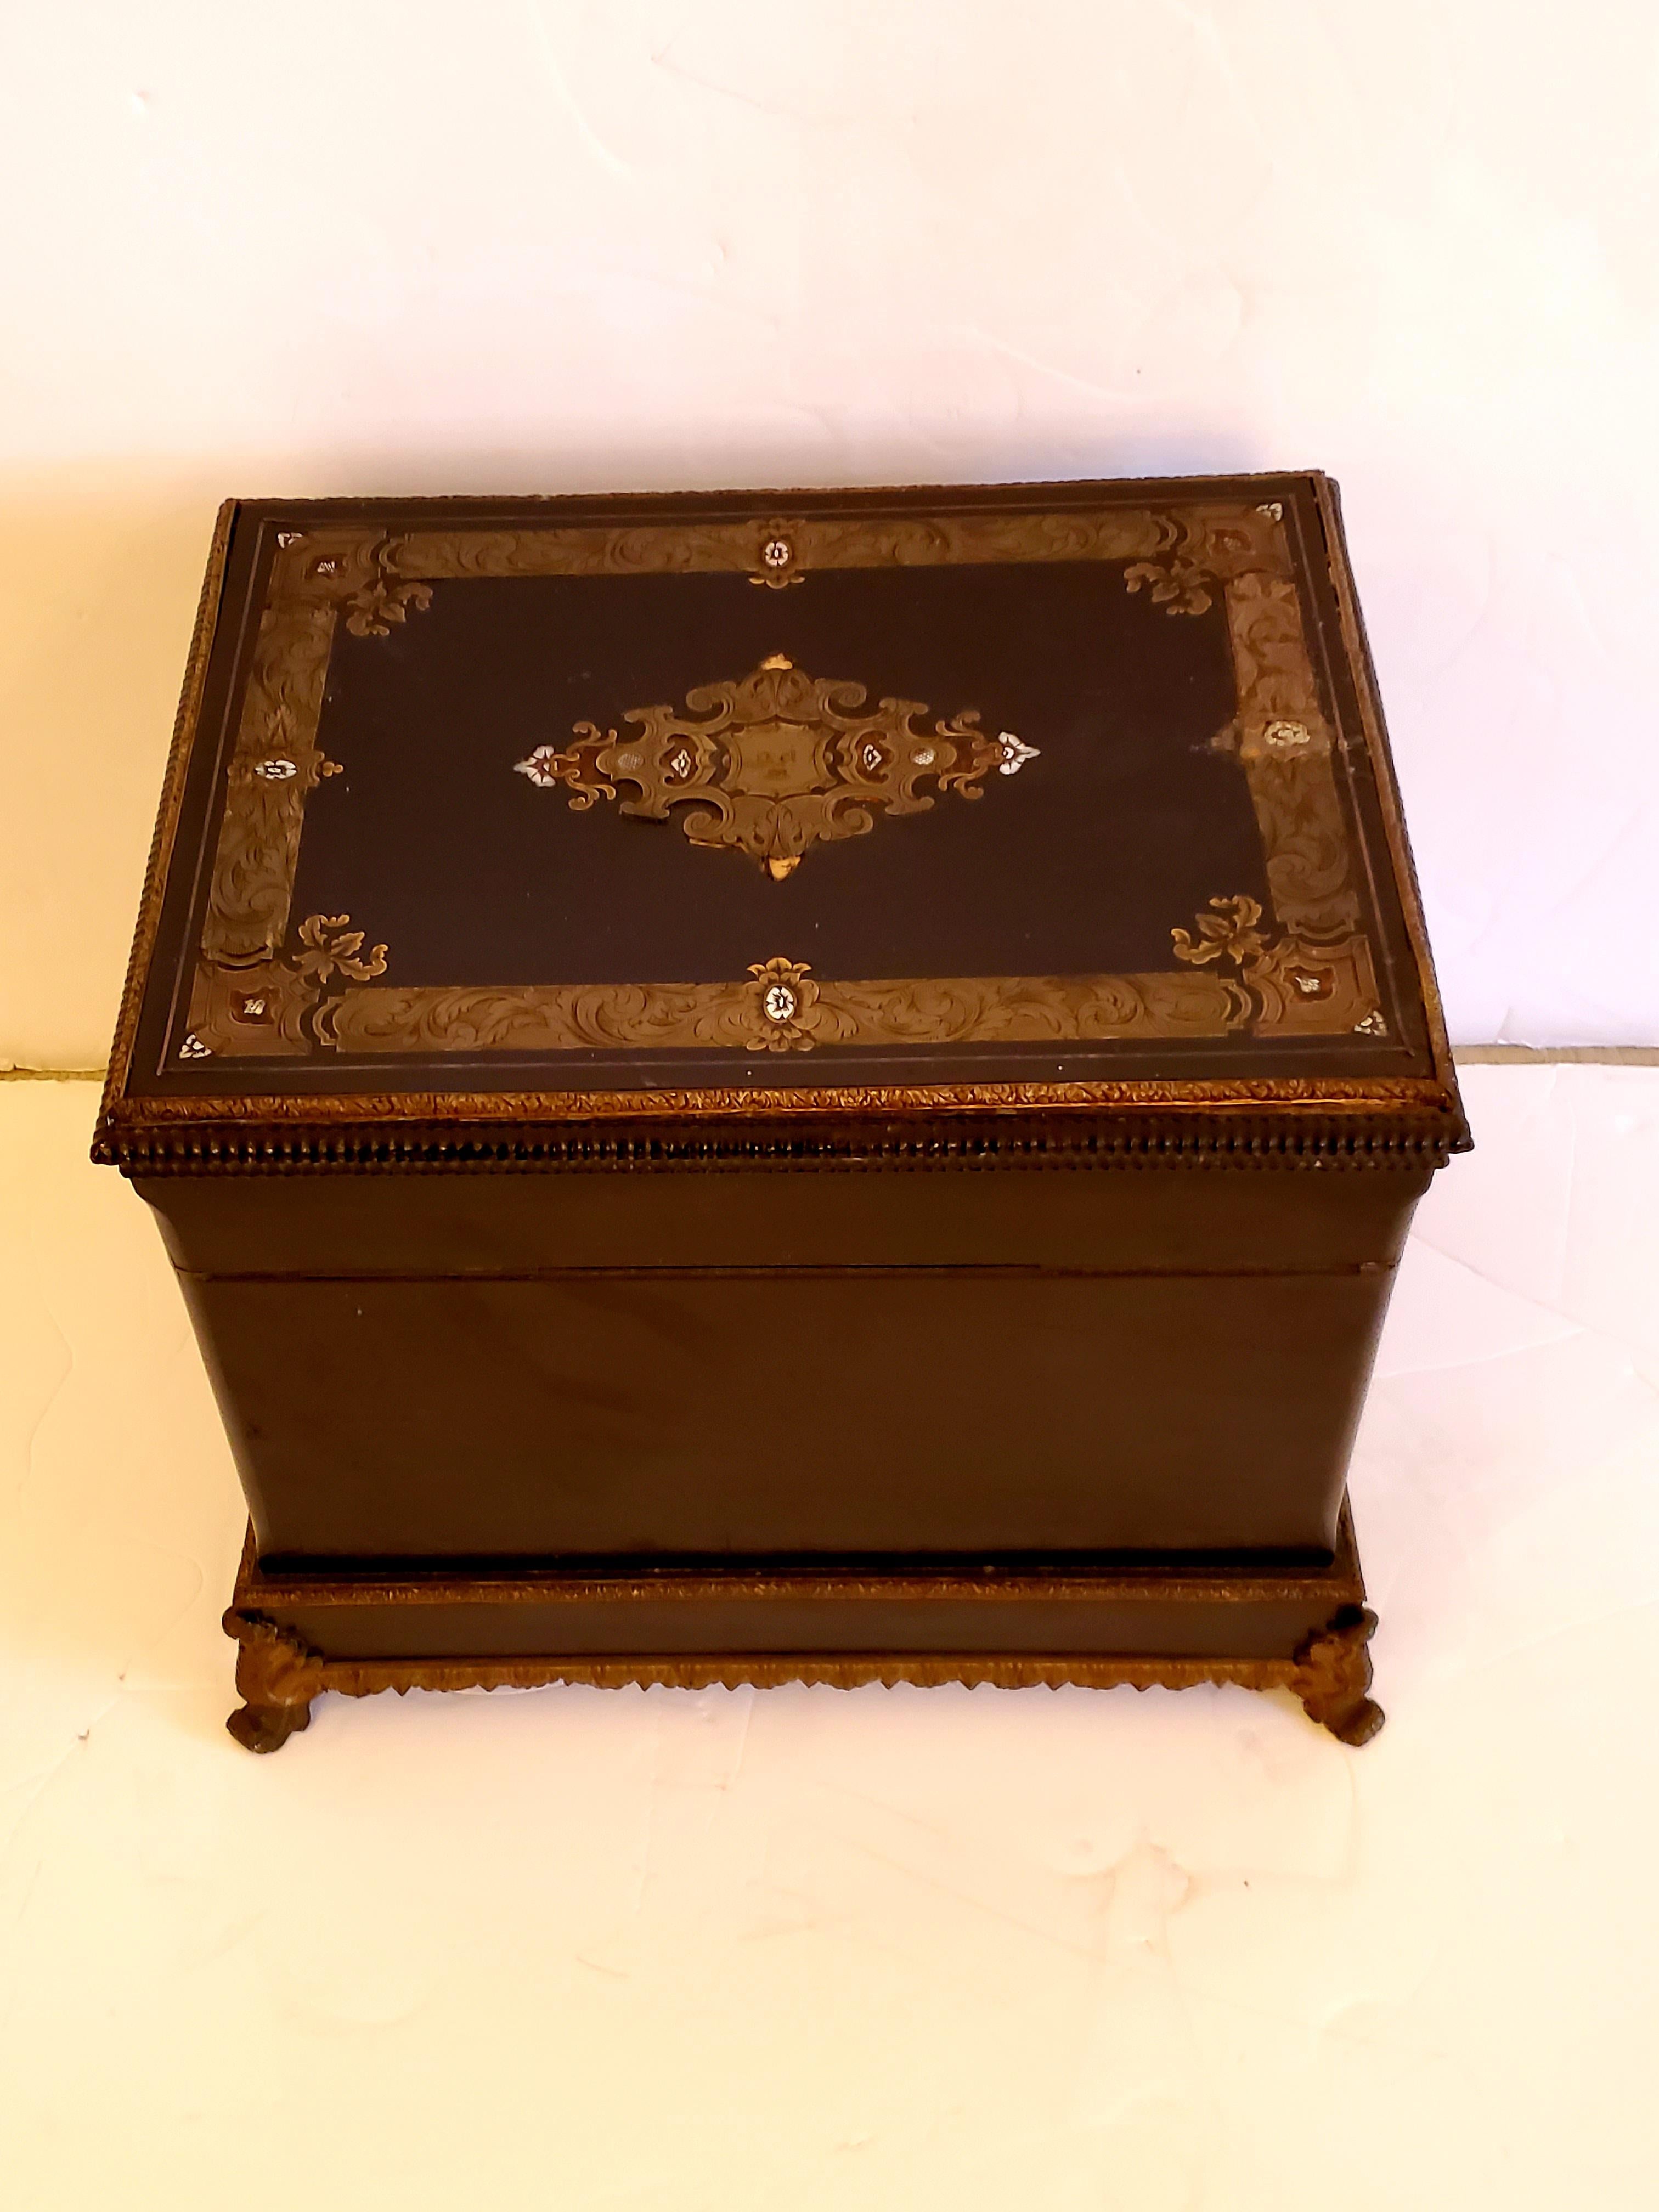 North American Extraordinary Decorative Painted Box with Ormolu Base